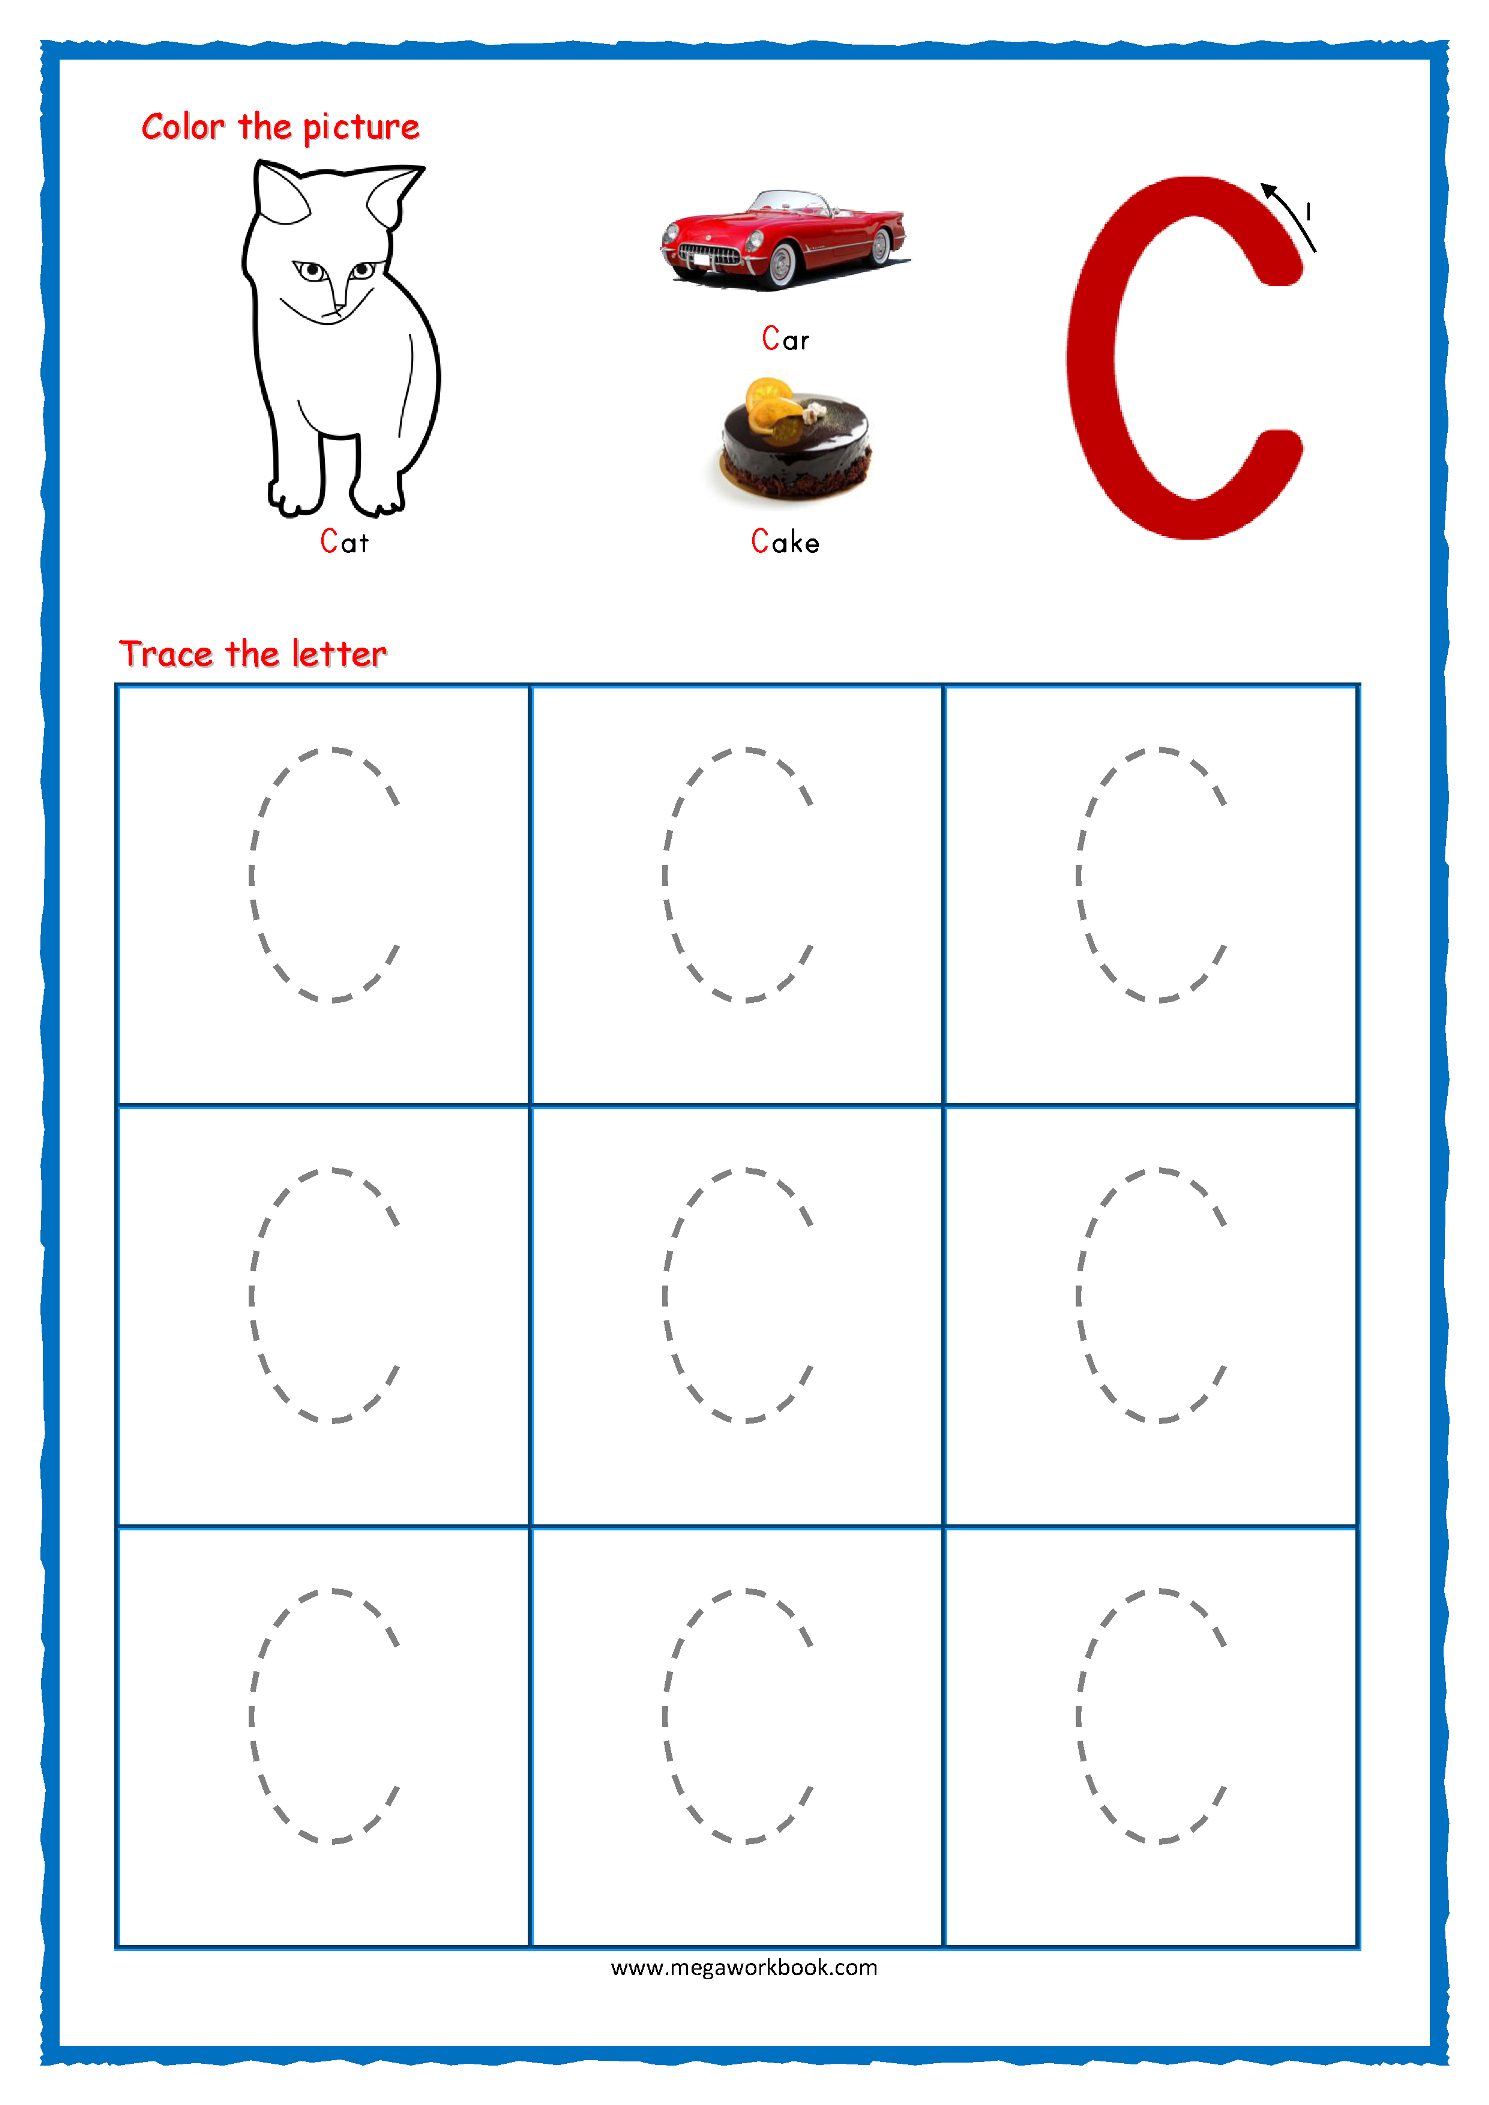 Tracing Letters - Alphabet Tracing - Capital Letters intended for Letter Tracing Worksheets Pre K